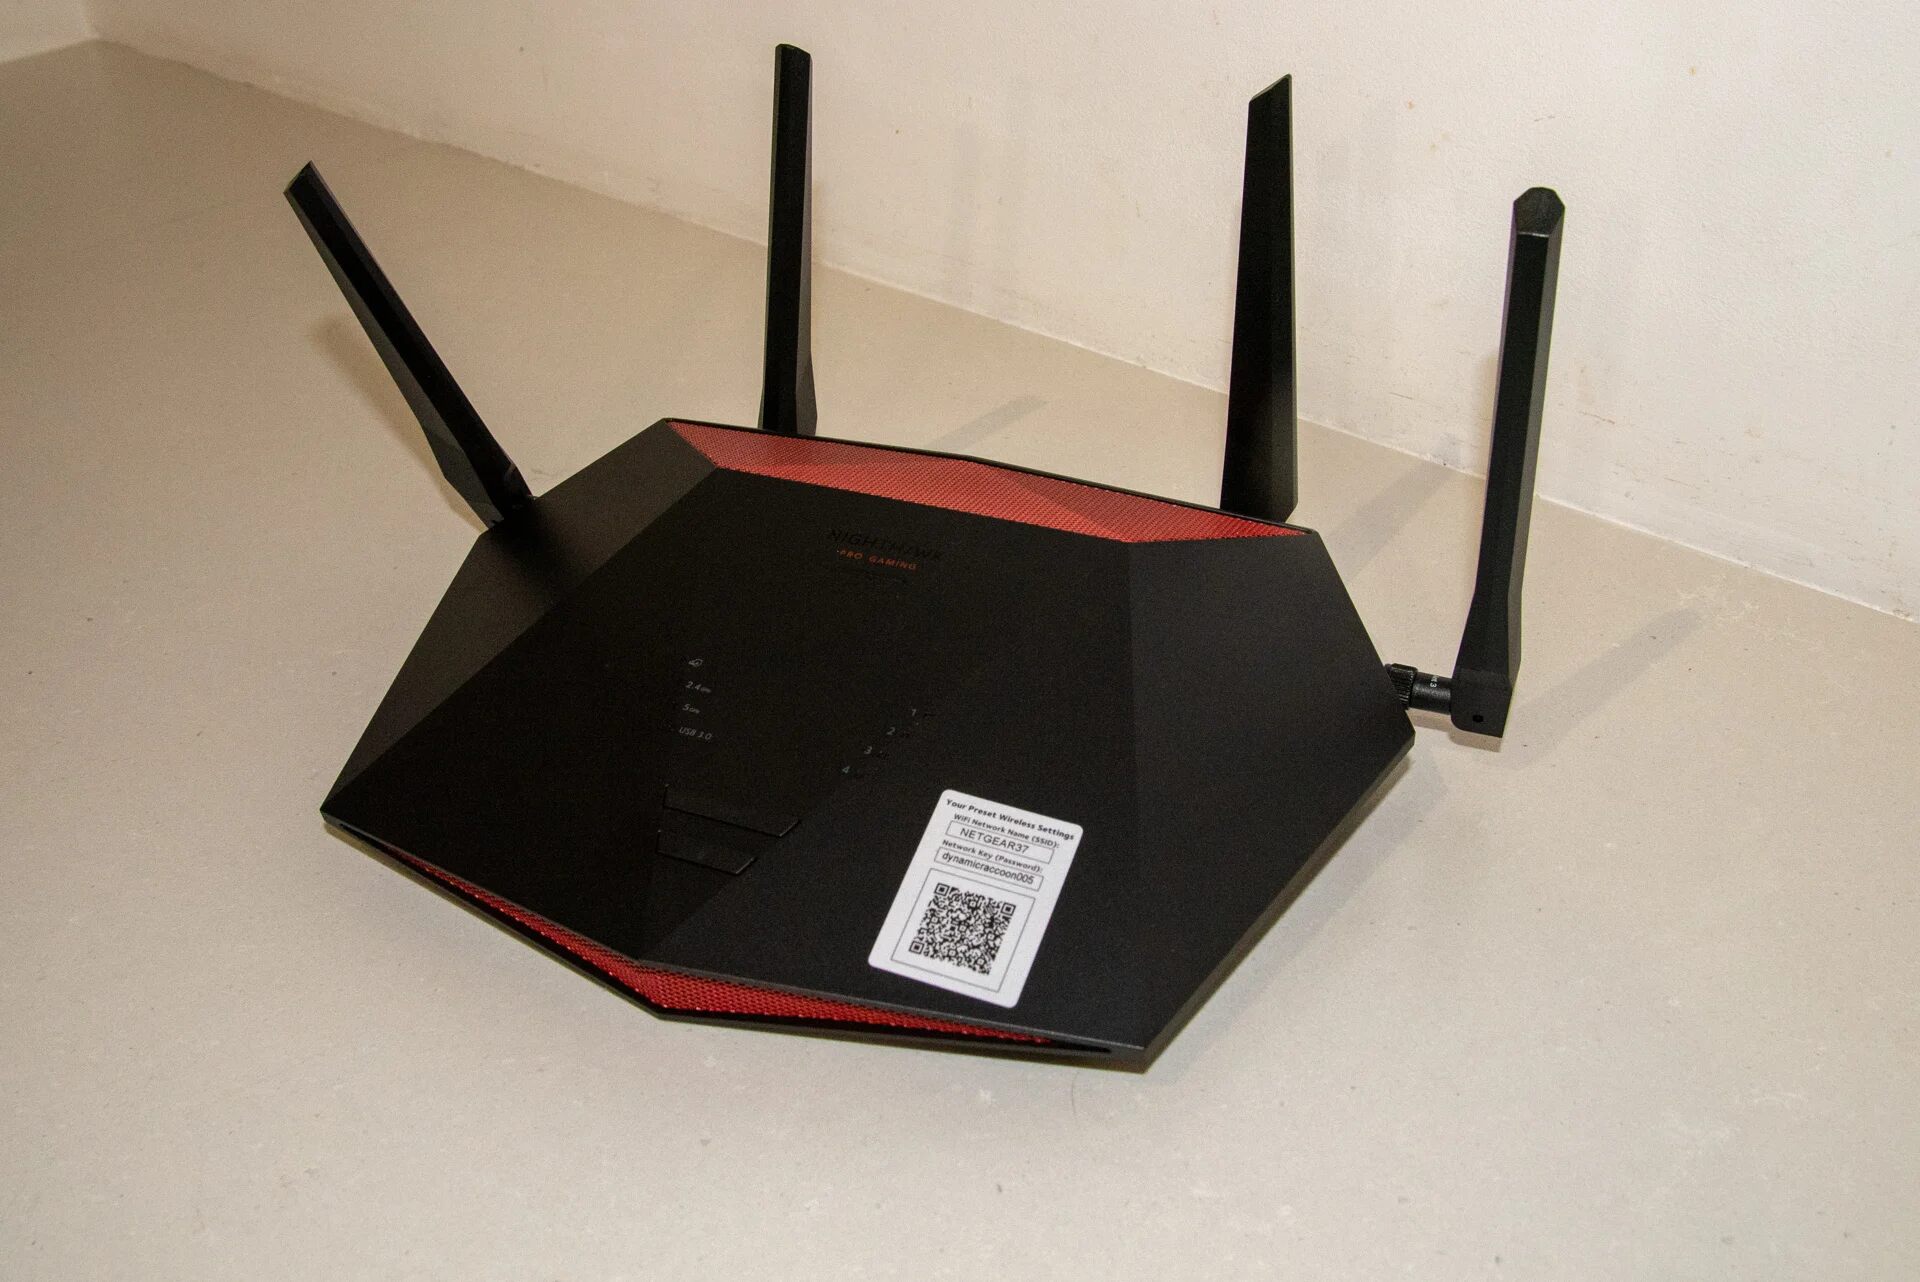 What Is A Network Key For Netgear Wireless Router